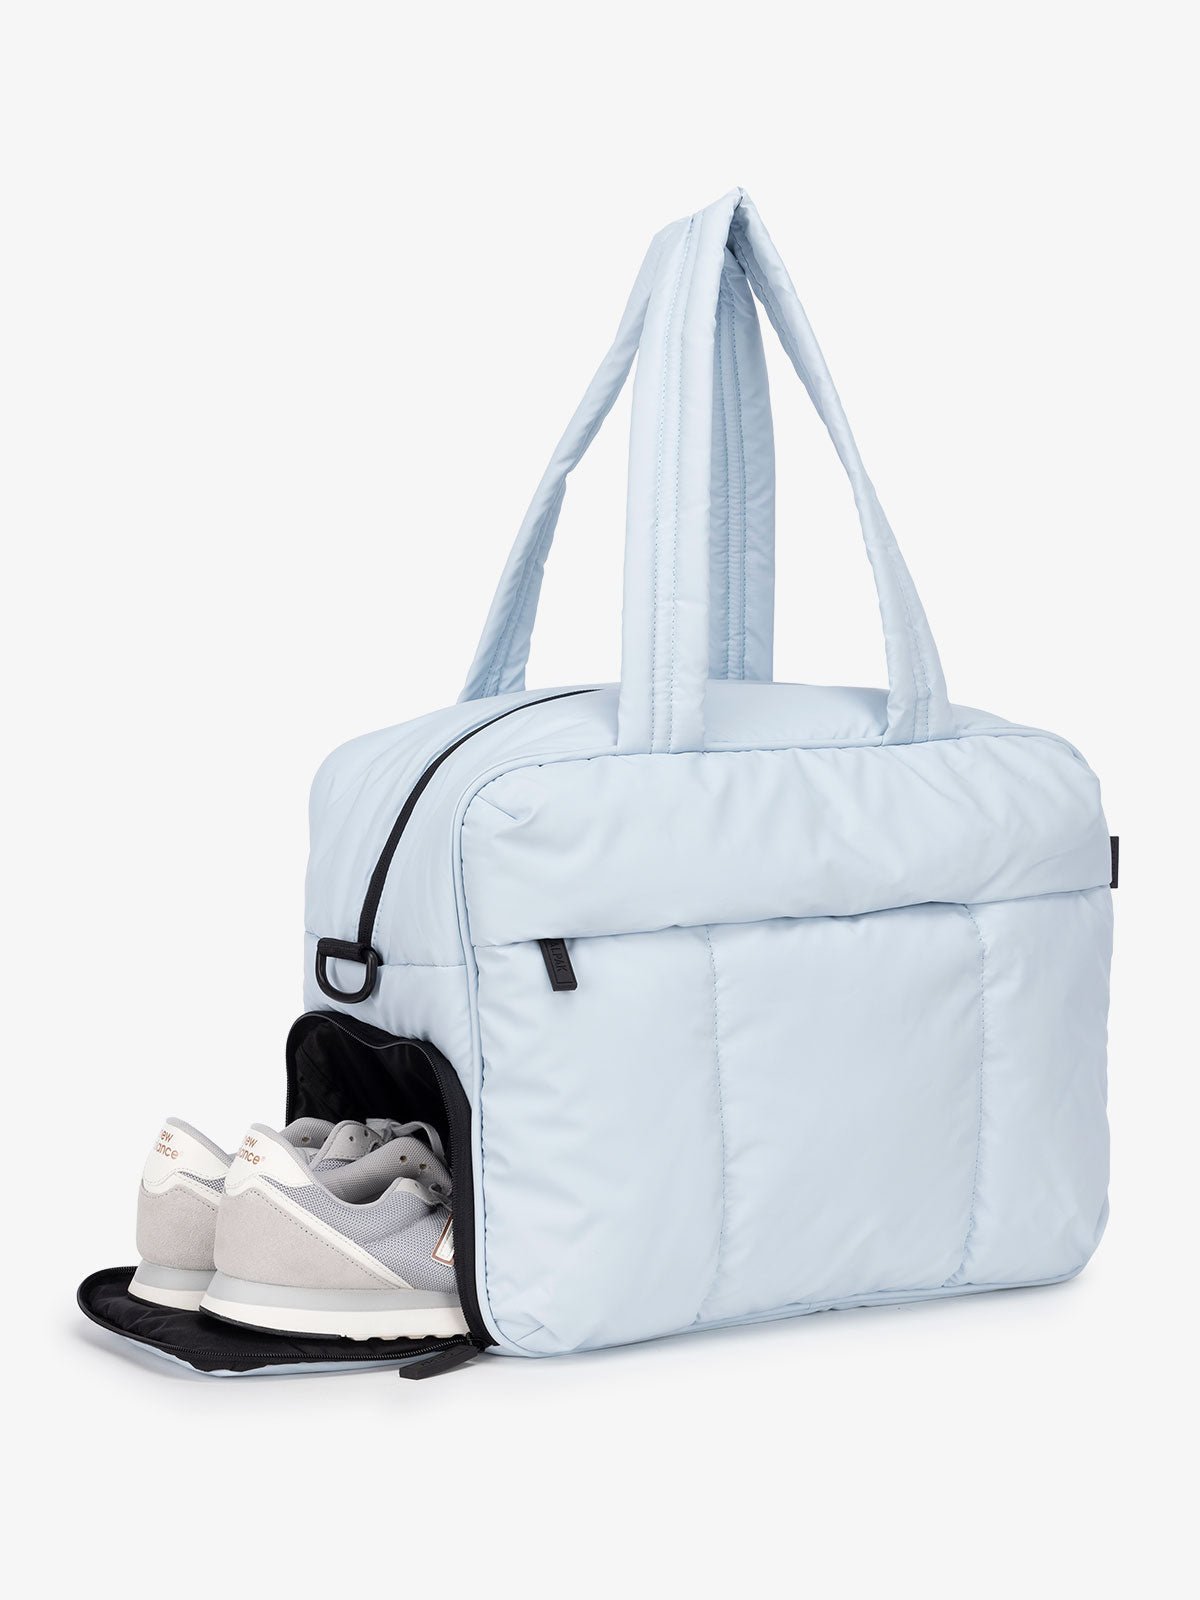 mist blue Luka weekend duffle bag with shoe compartment